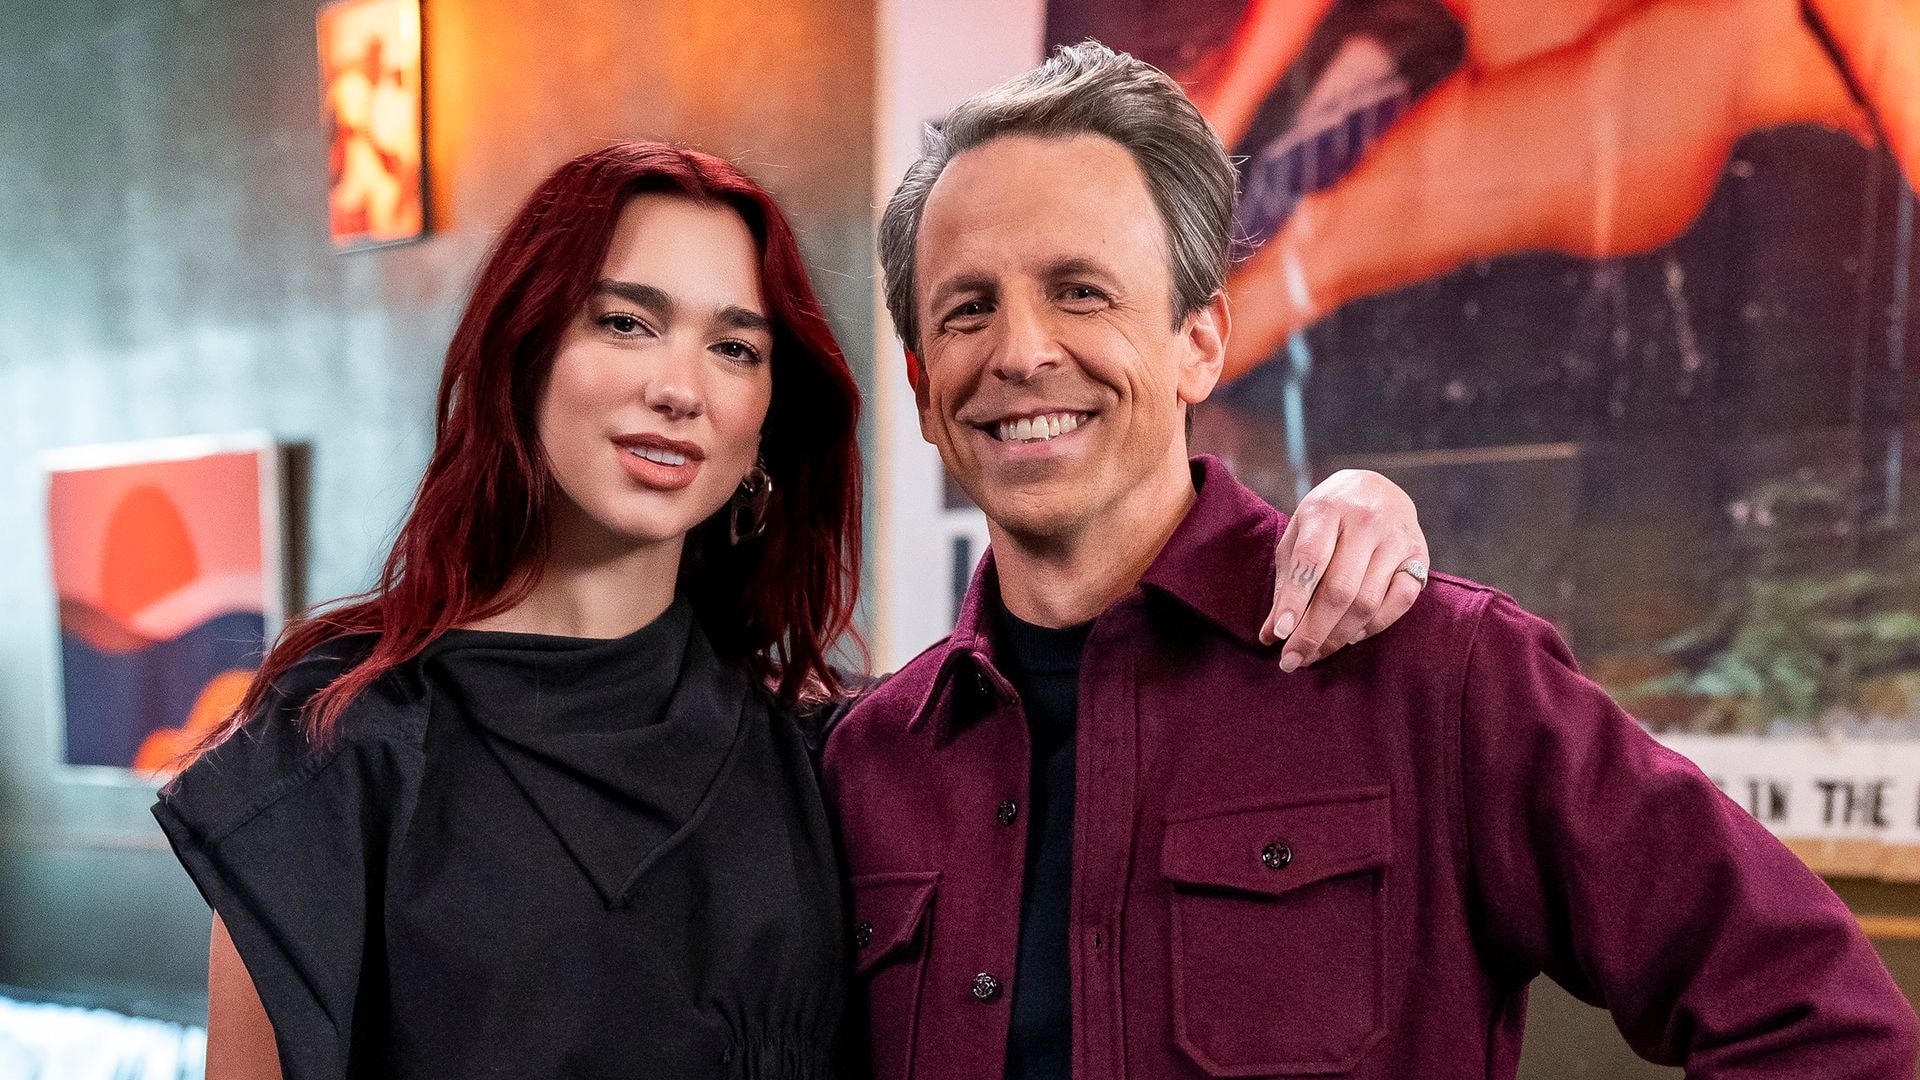 Dua Lipa and host Seth Meyers during "Day Drinking" on Late Night